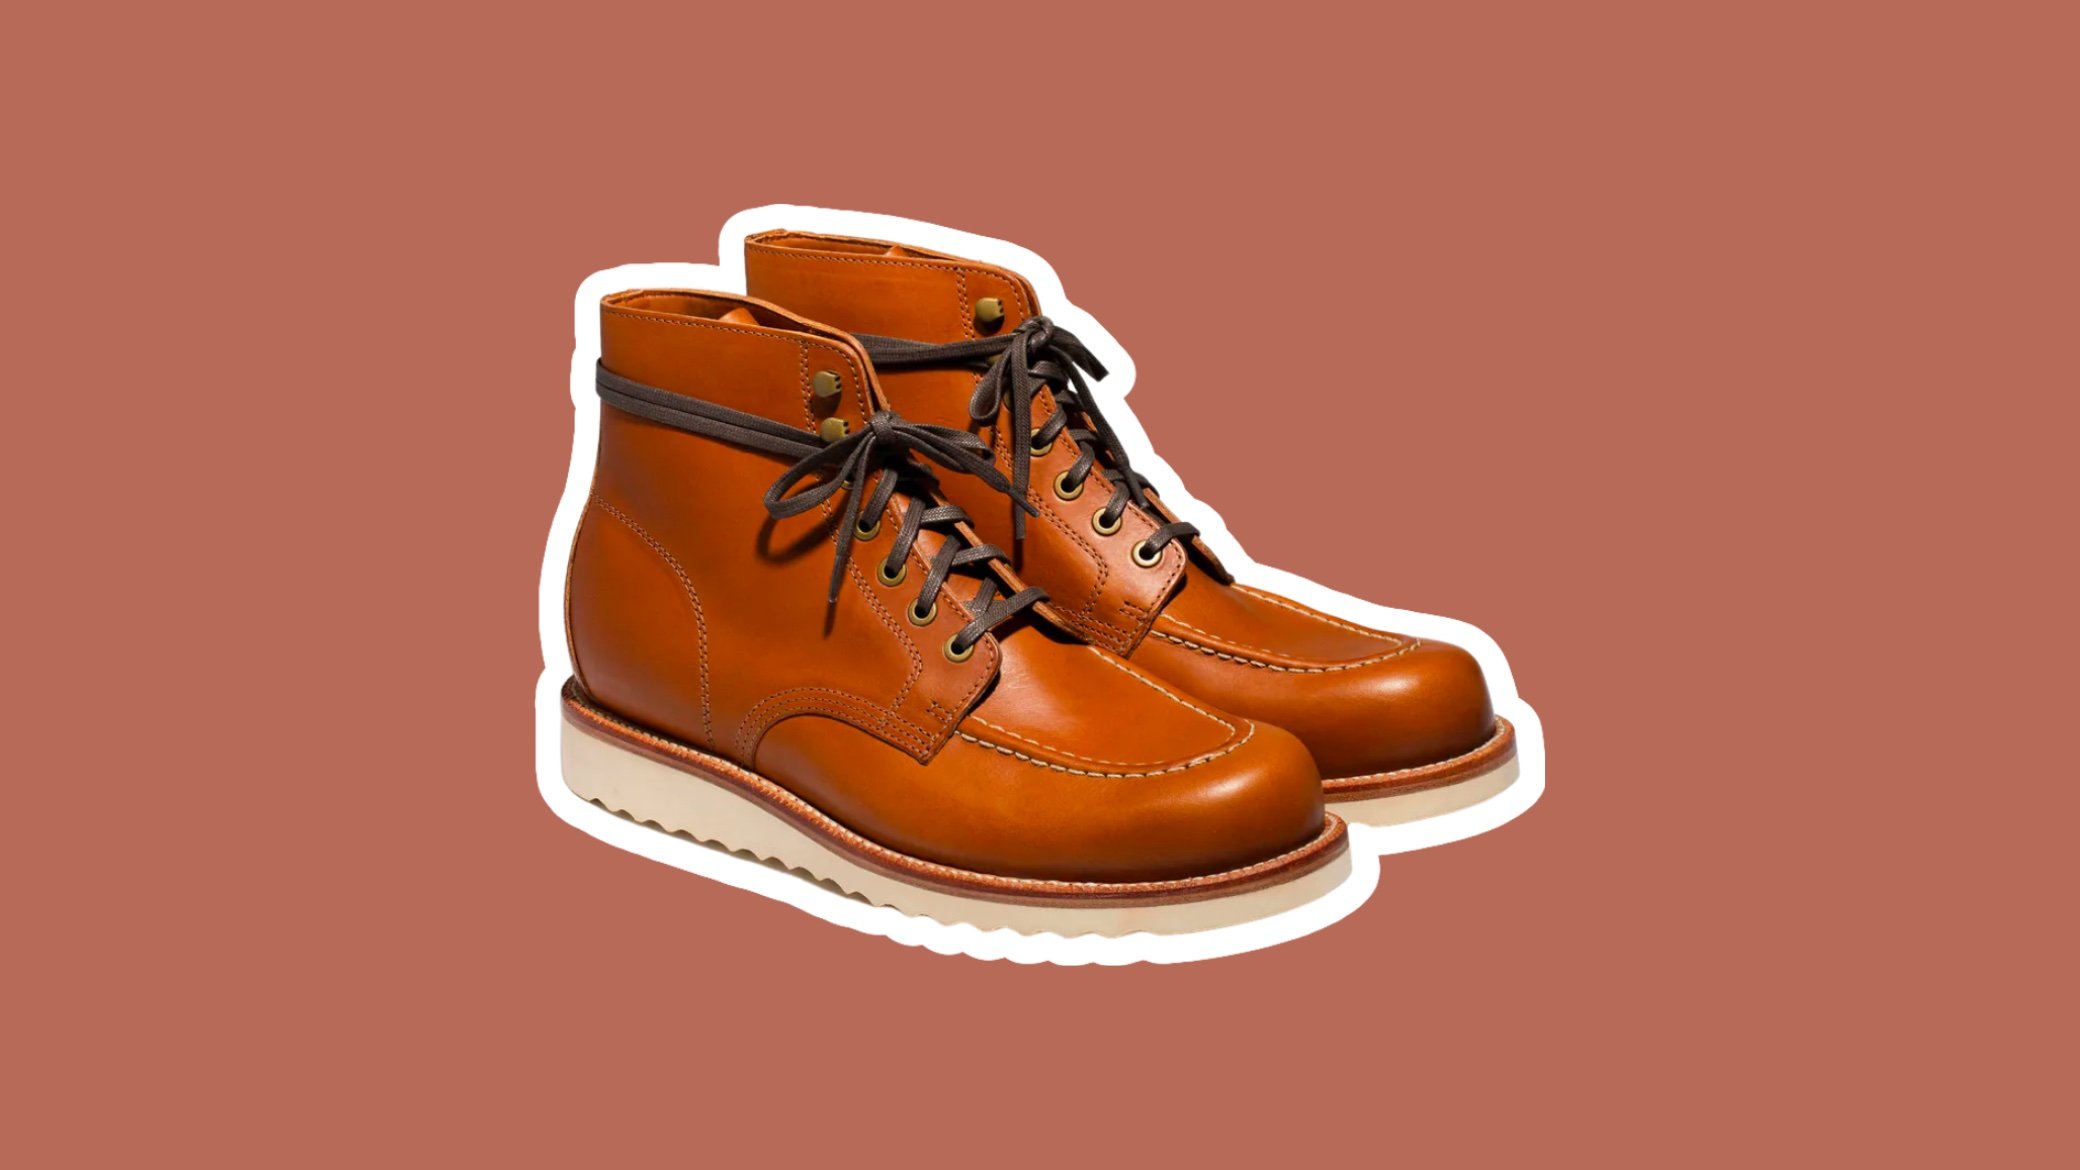 The 7 Best Moc Toe Boots On The Market 2023 | Best Value, Toughest, Best  for Work, and More - stridewise.com